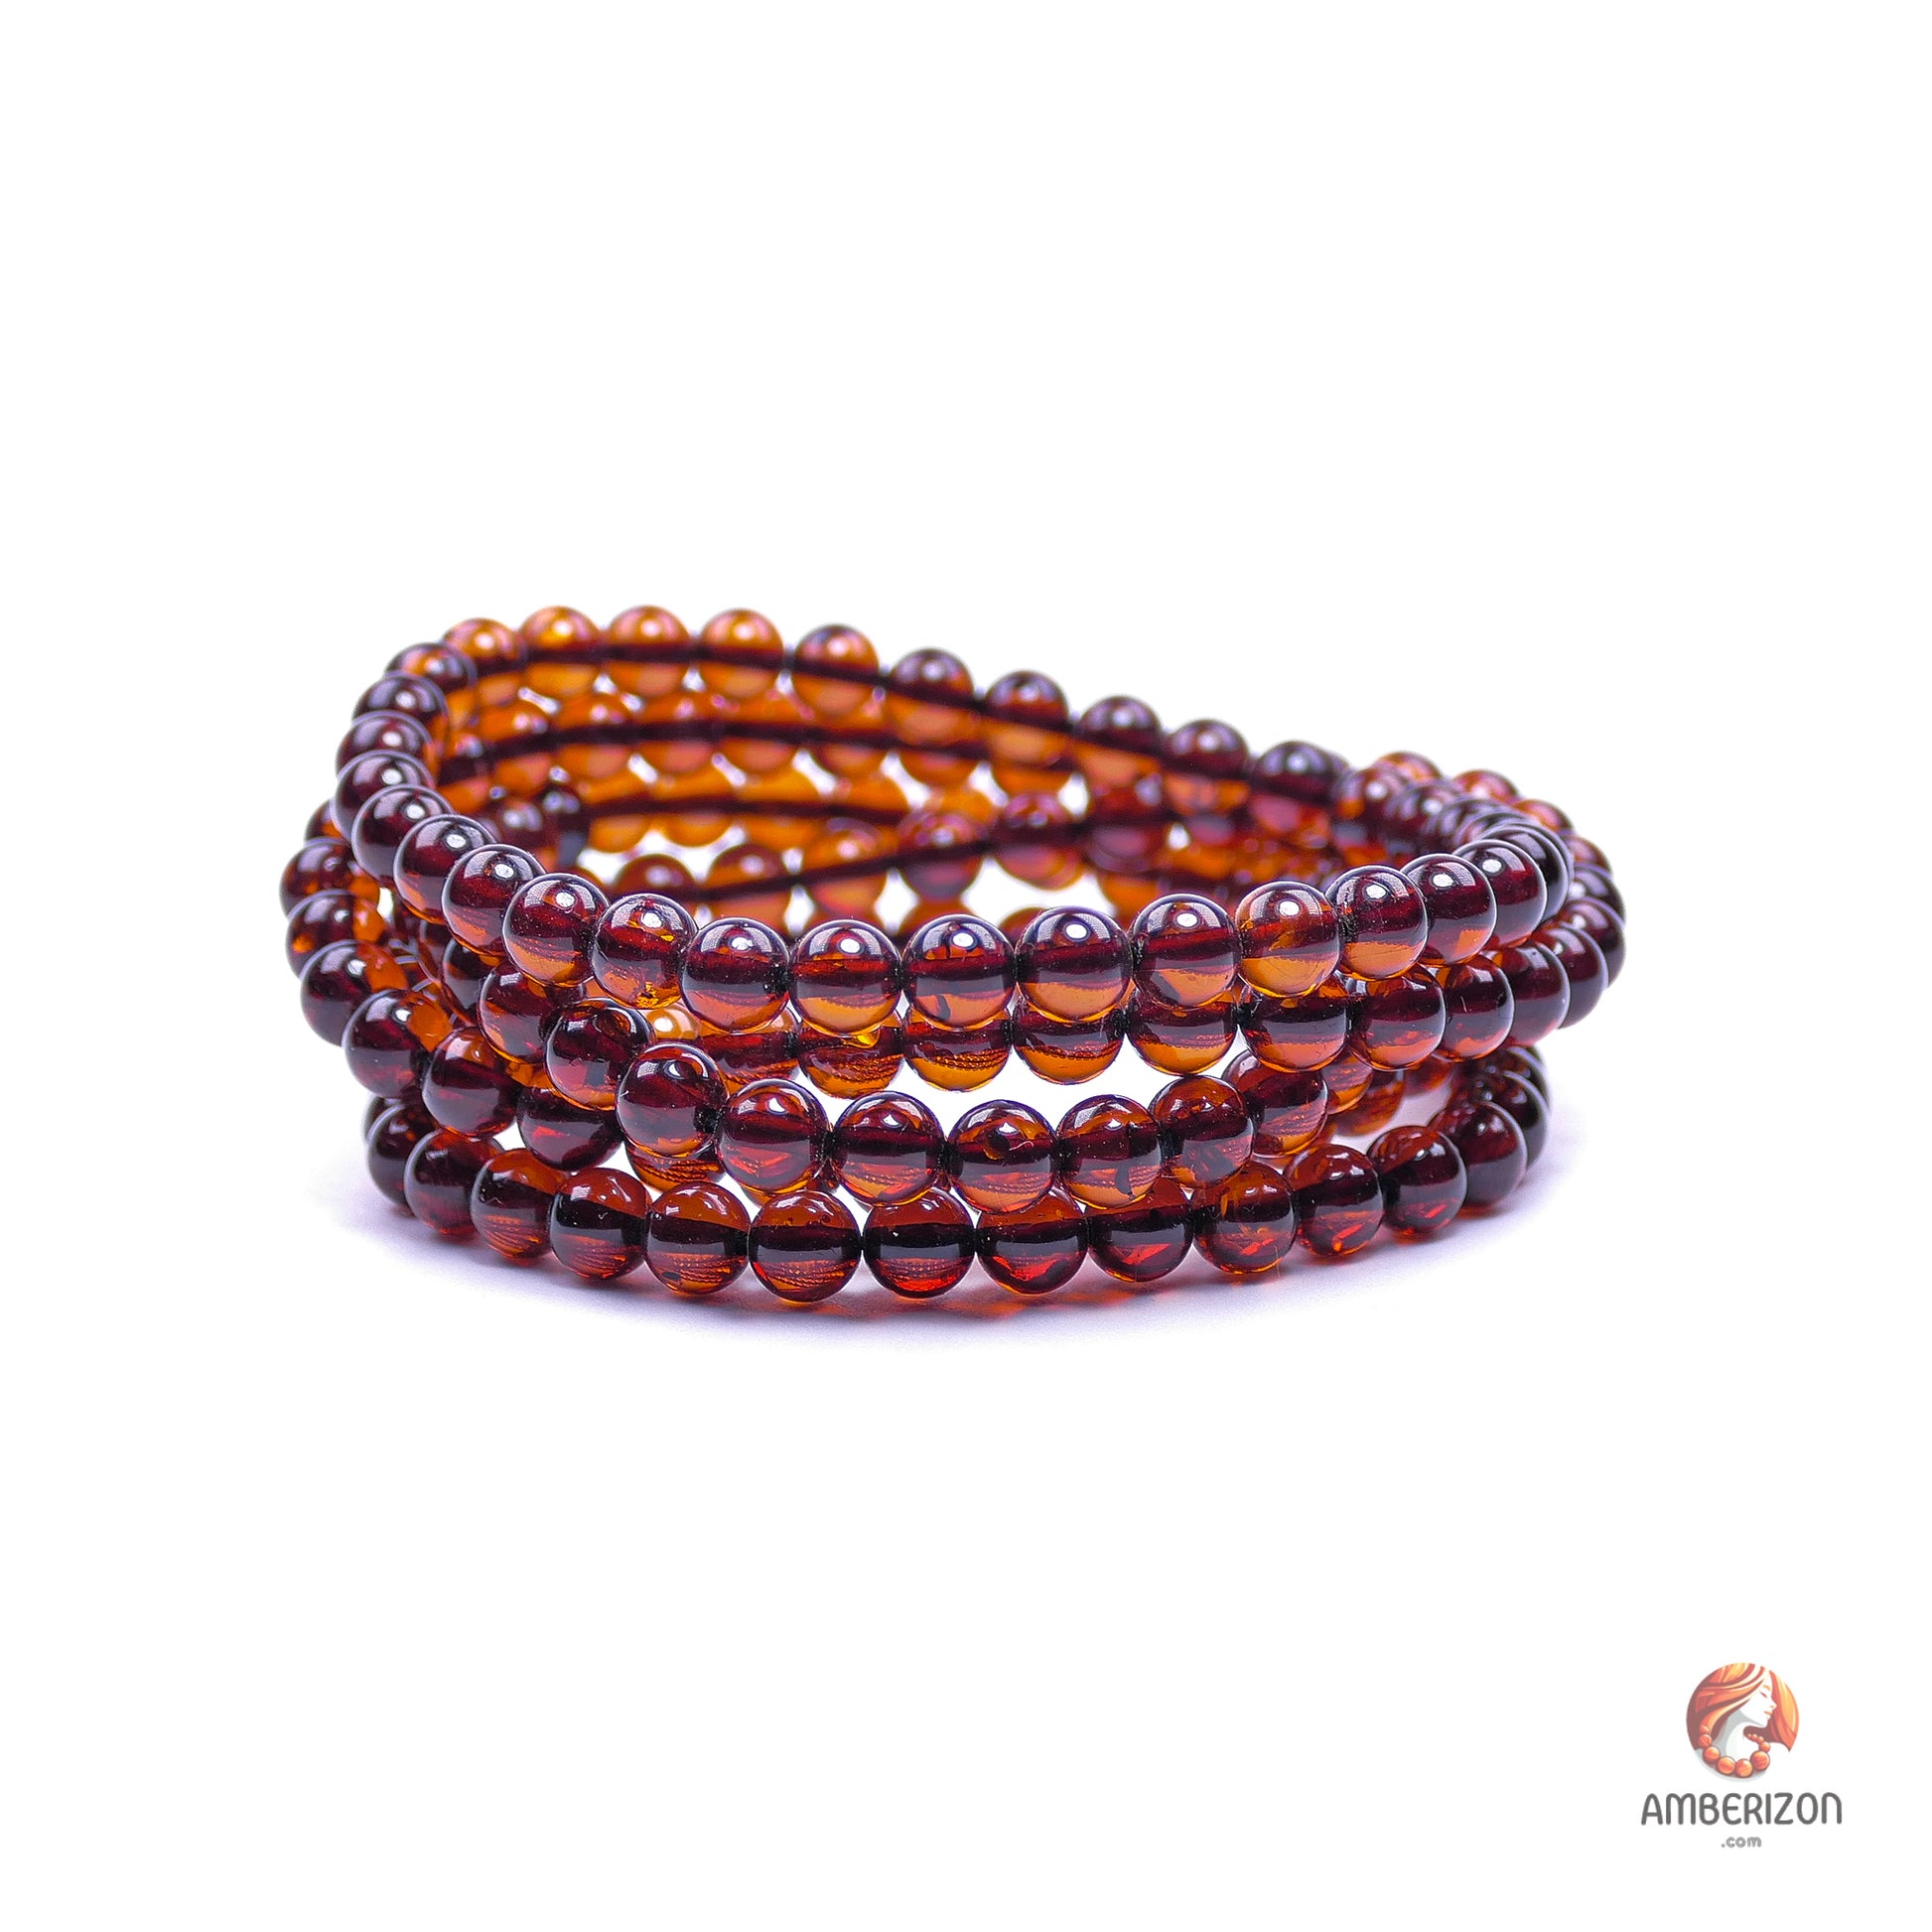 Polished cherry amber ball bracelet - Premium AAA quality round beads - Stretchy